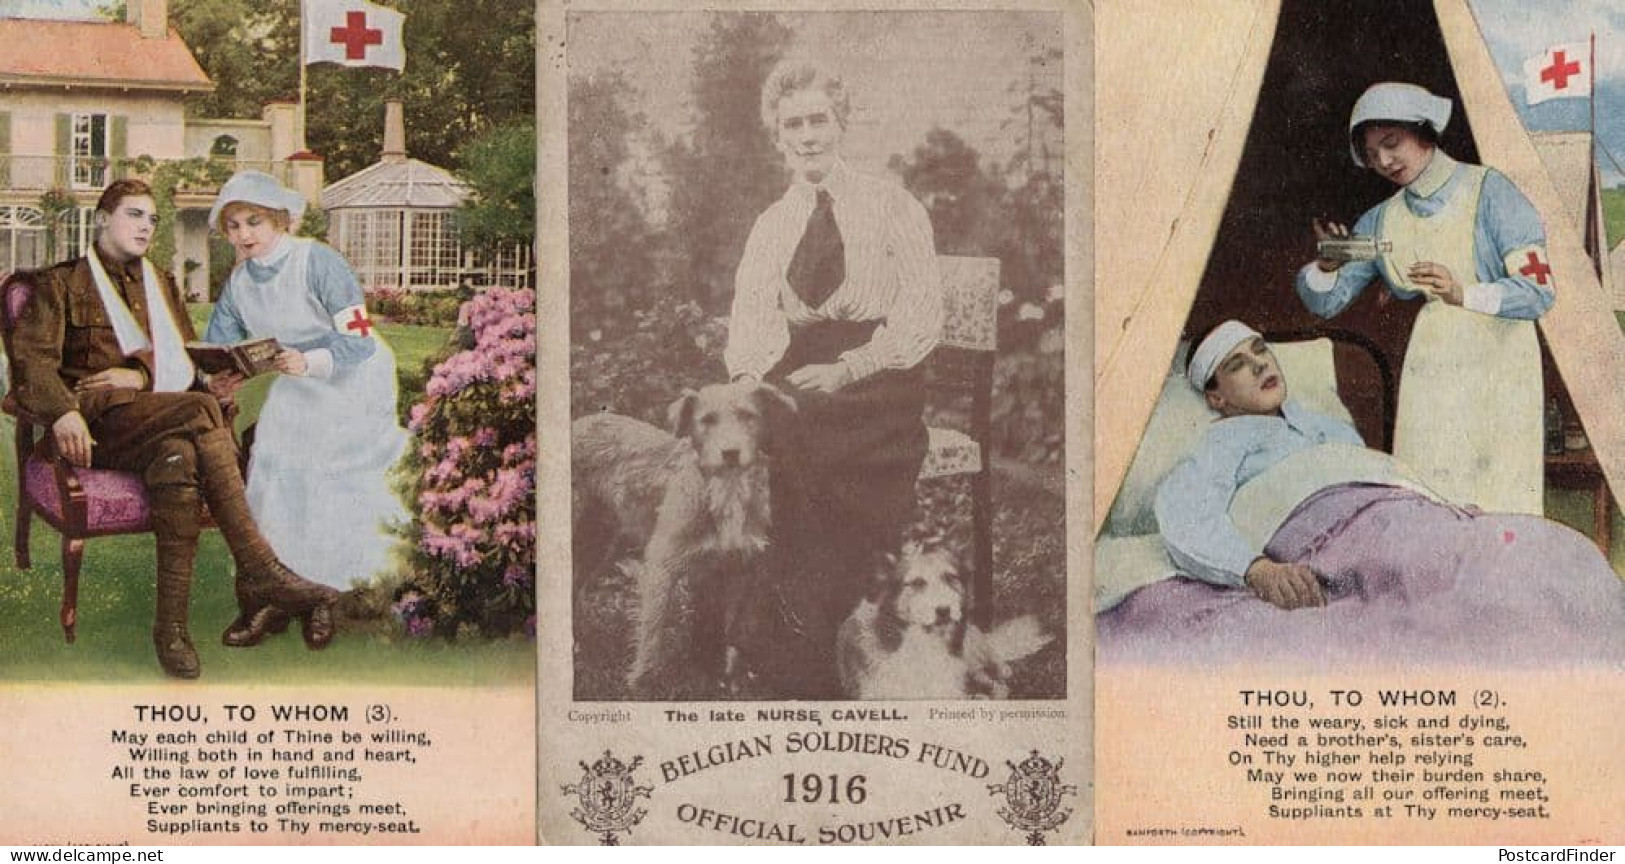 Belgian Belgium Soliders Fund Official 1916 Souvenir Edith Cavell Postcard & More - Croce Rossa